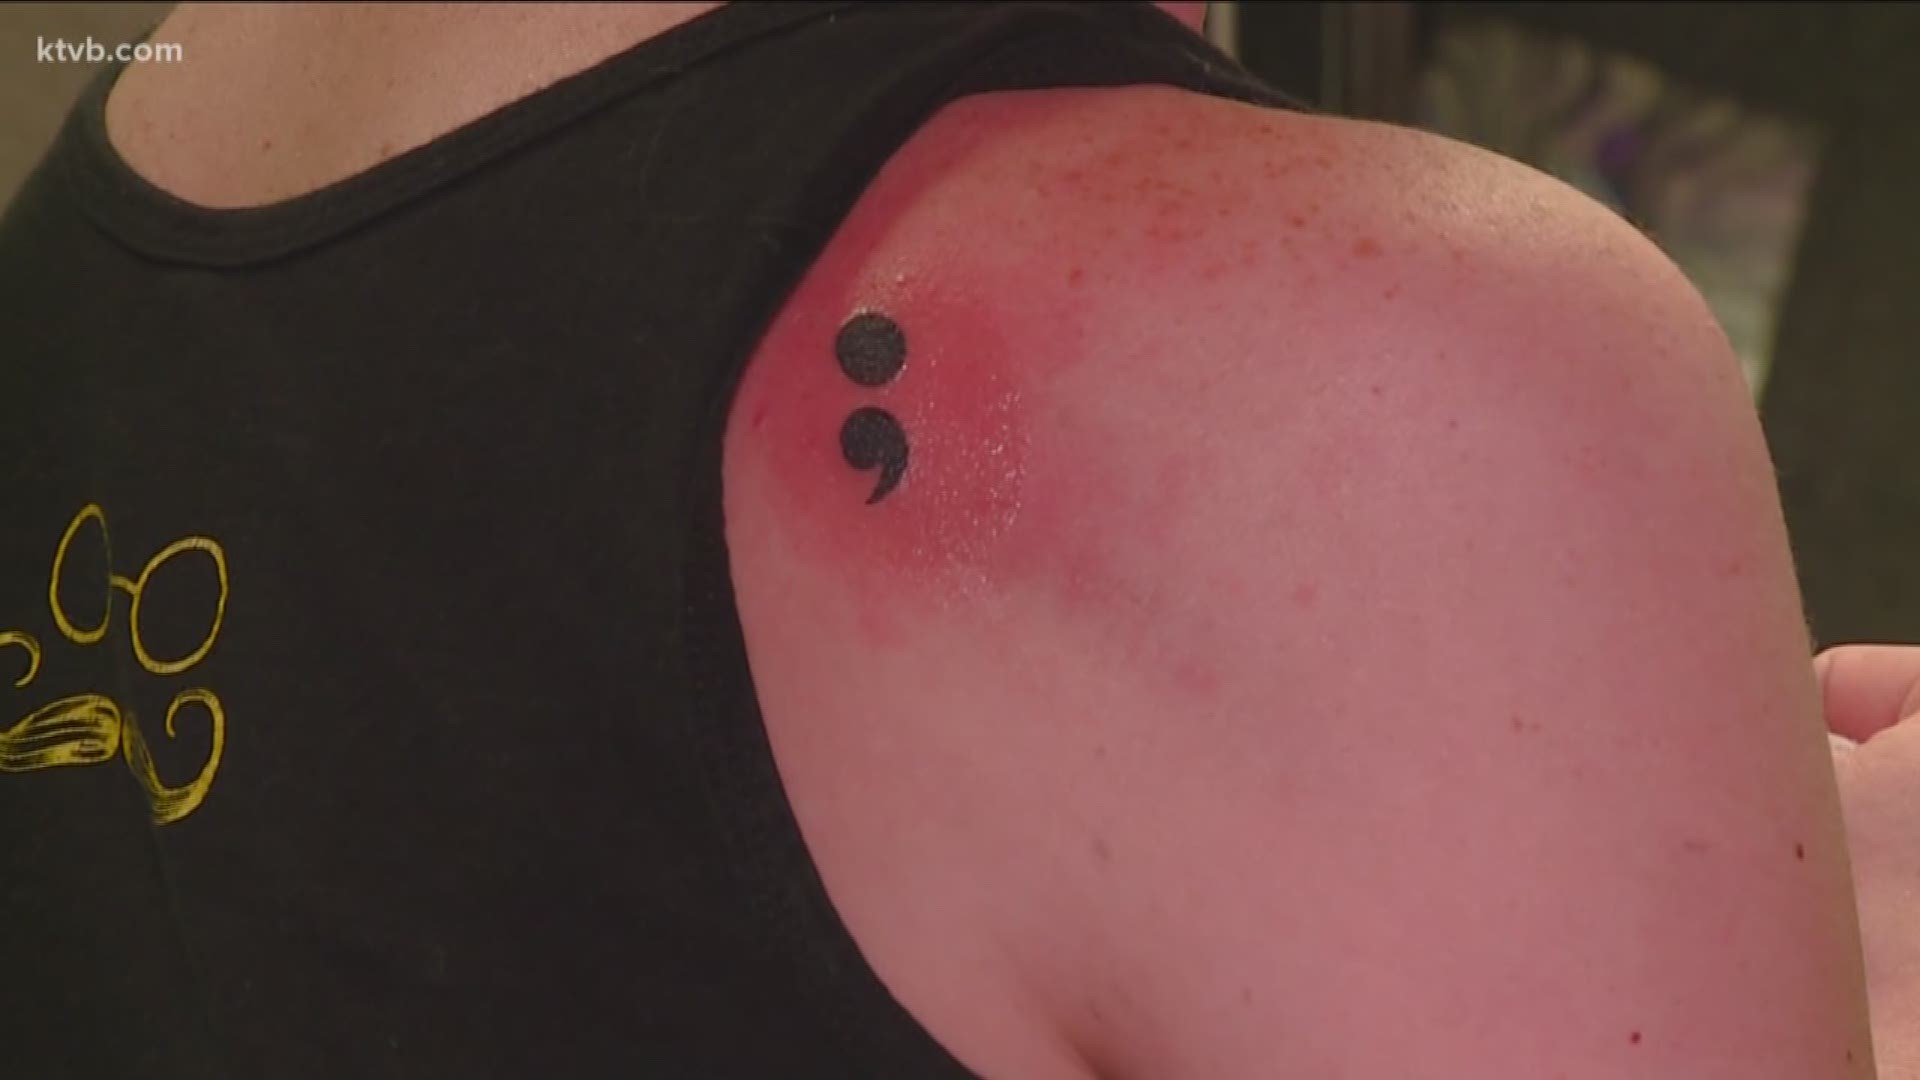 Tattoo artists and suicide prevention advocates in Boise are looking to get a conversation started with the Semicolon Tattoo Project.